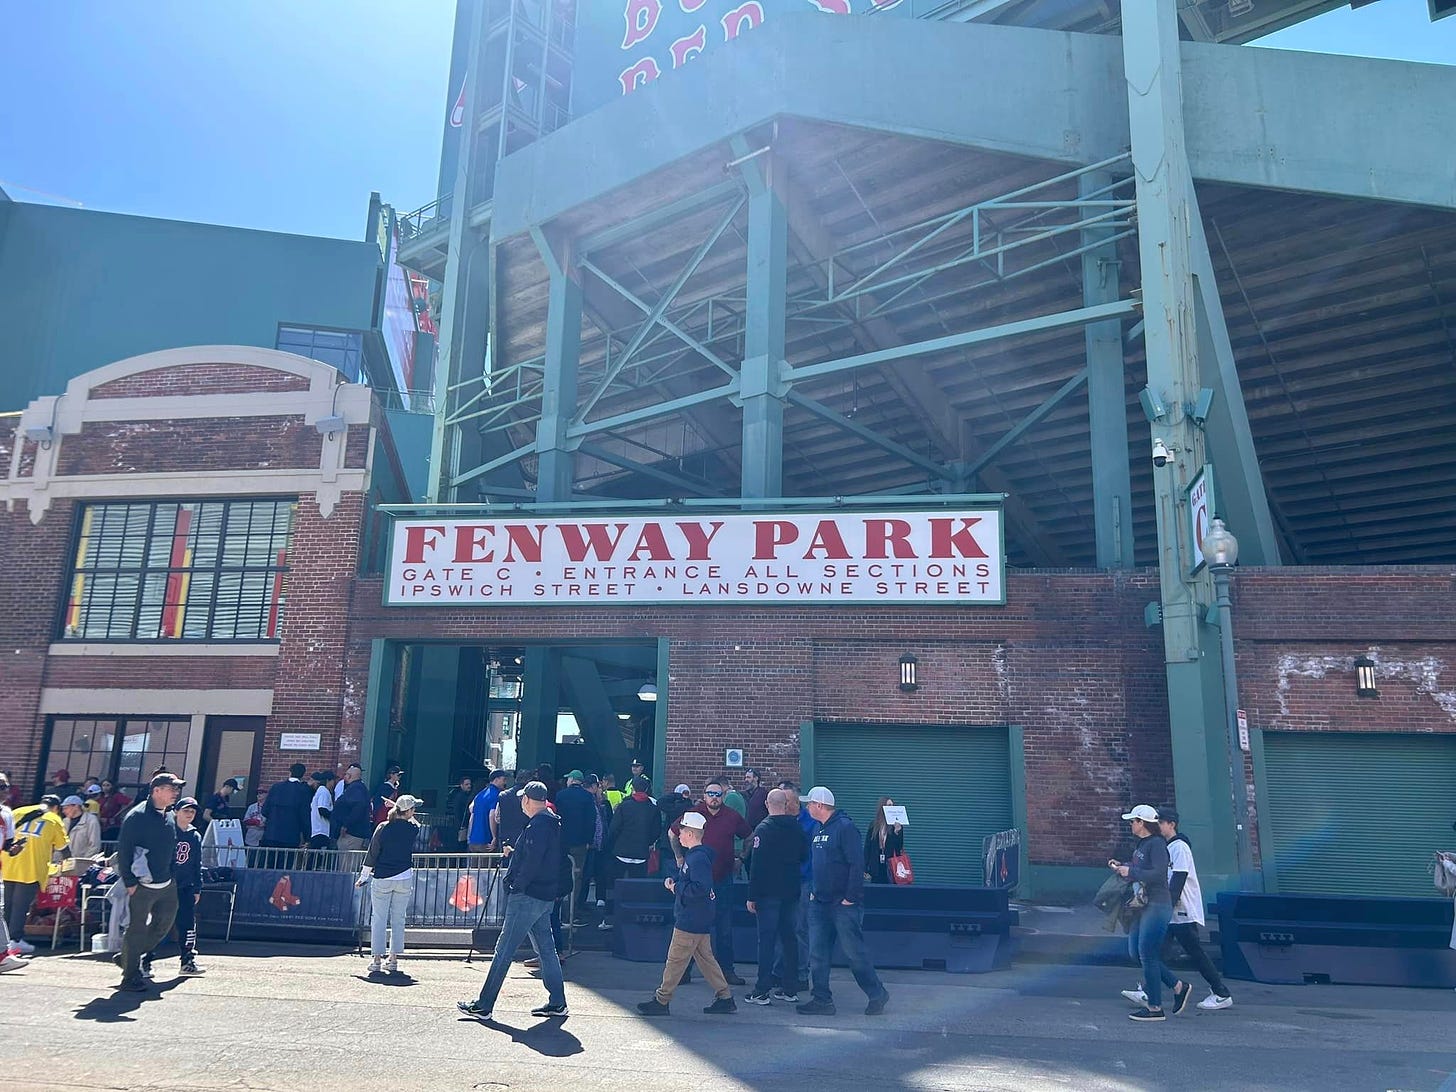 May be an image of ‎13 people and ‎text that says '‎河风M لن FENWAYPARK FENWAY PARK ENTRANCE ALL ALL SE SECTIONS CT IPSWICH STREET LANSDOW STREET III‎'‎‎